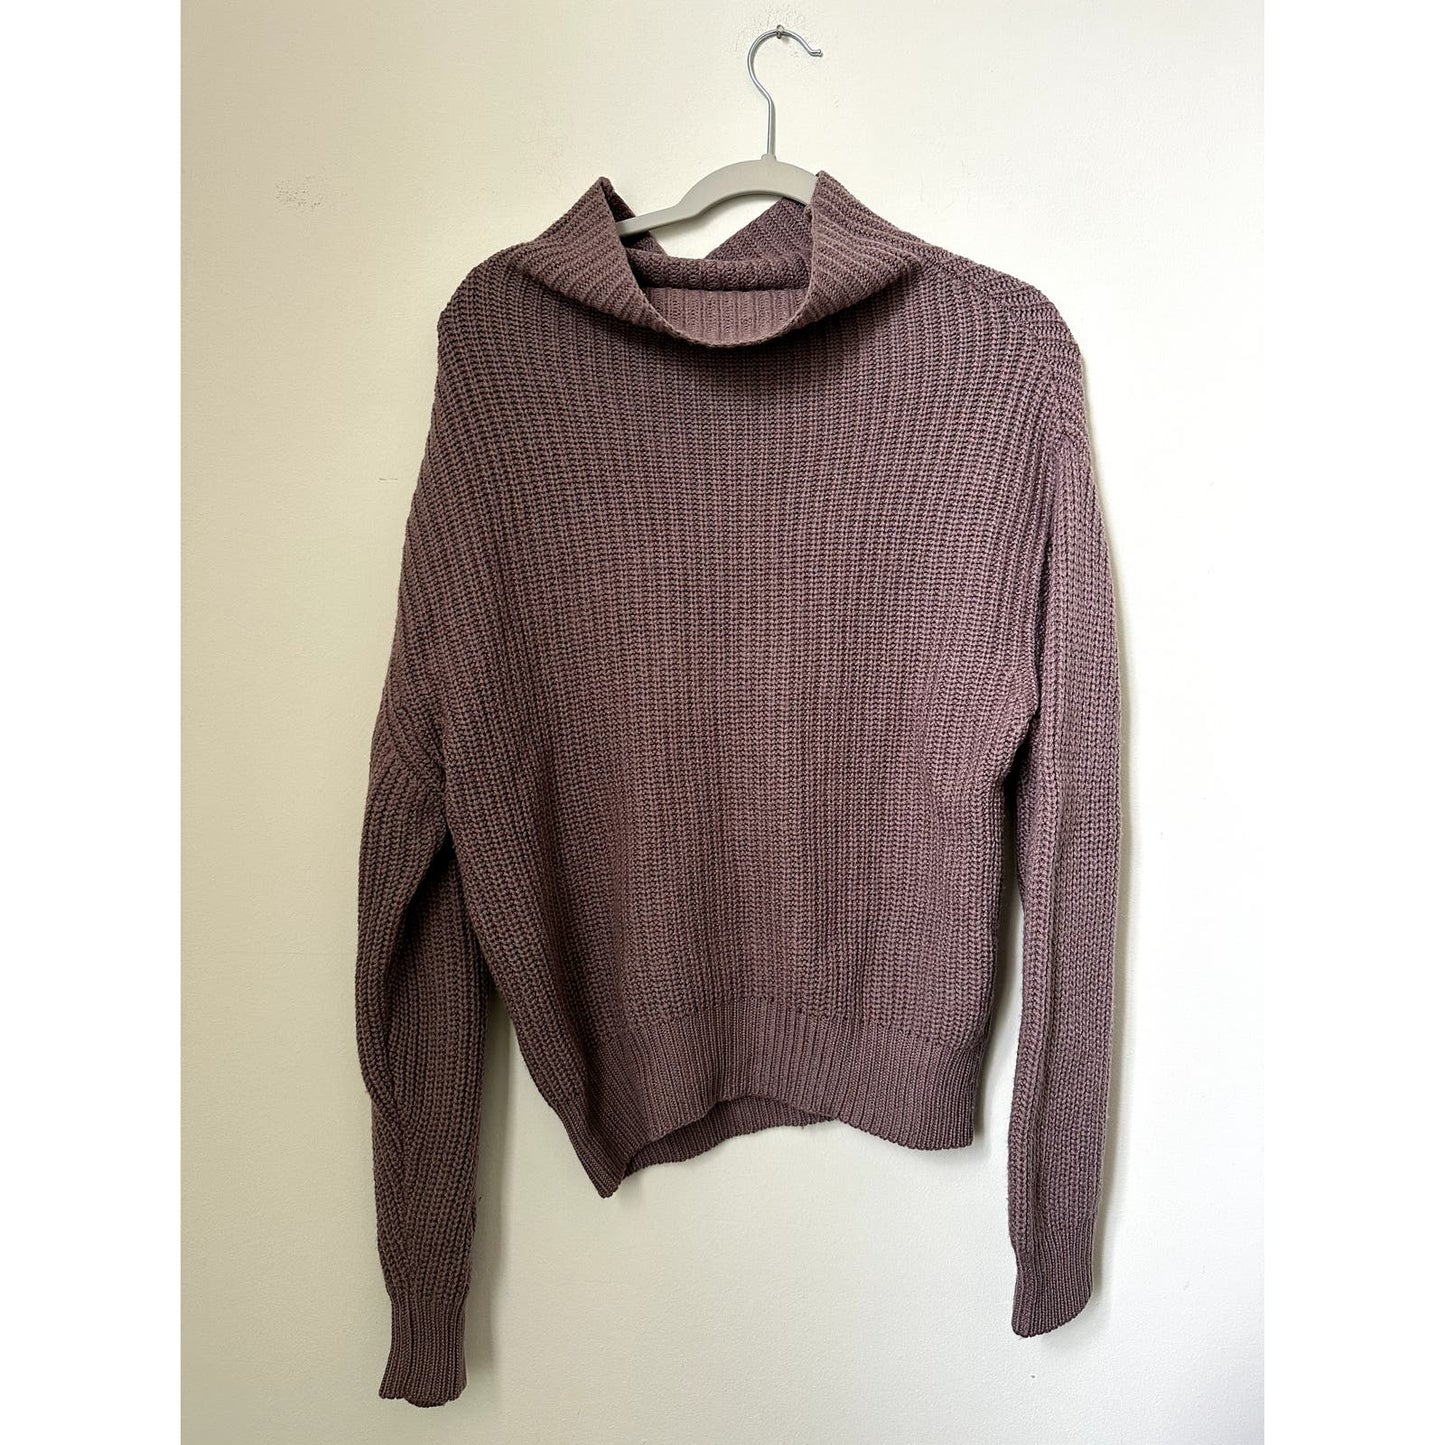 Aritzia Wilfred Montpellier Sweater, Size Small